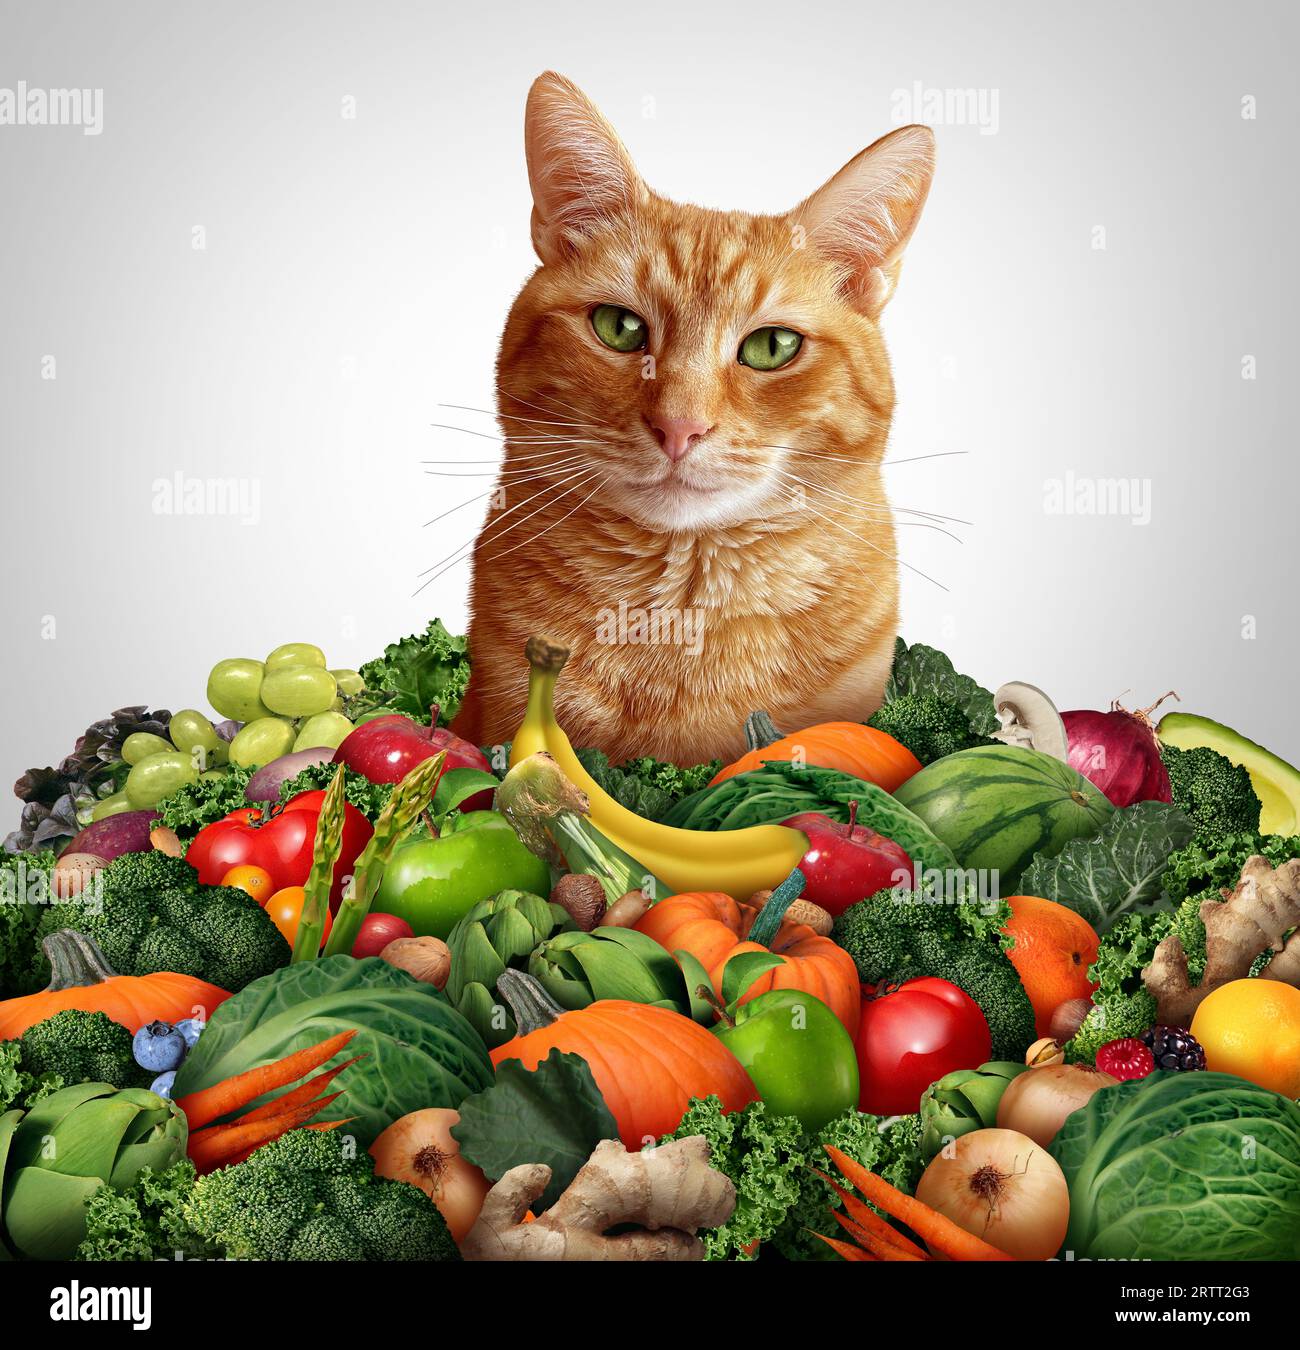 Cat Vegan Diet and health benefits of cats eating fruits and vegetables for plant-based diets as a green alternative meal for feline pets as green veg Stock Photo